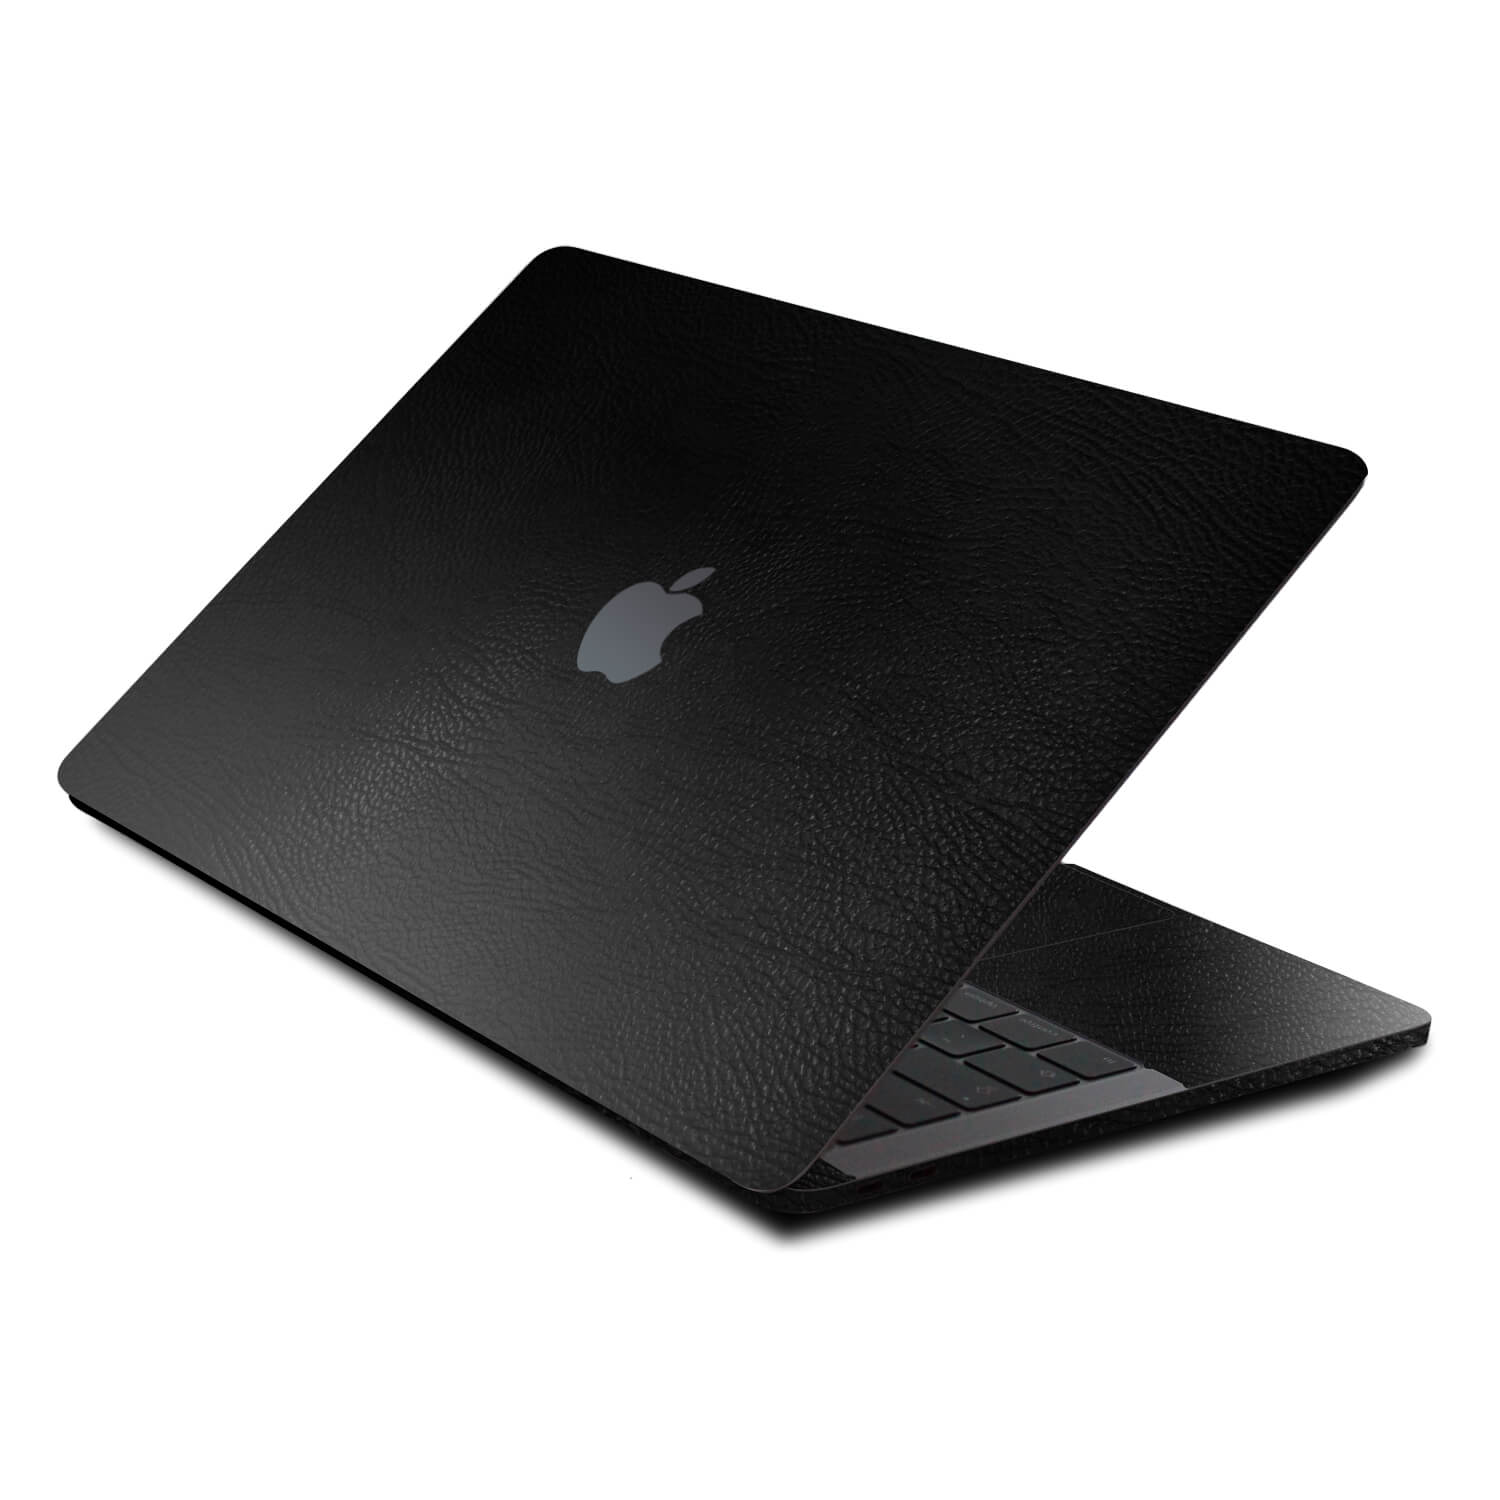 macbook pro skins 13 inch review